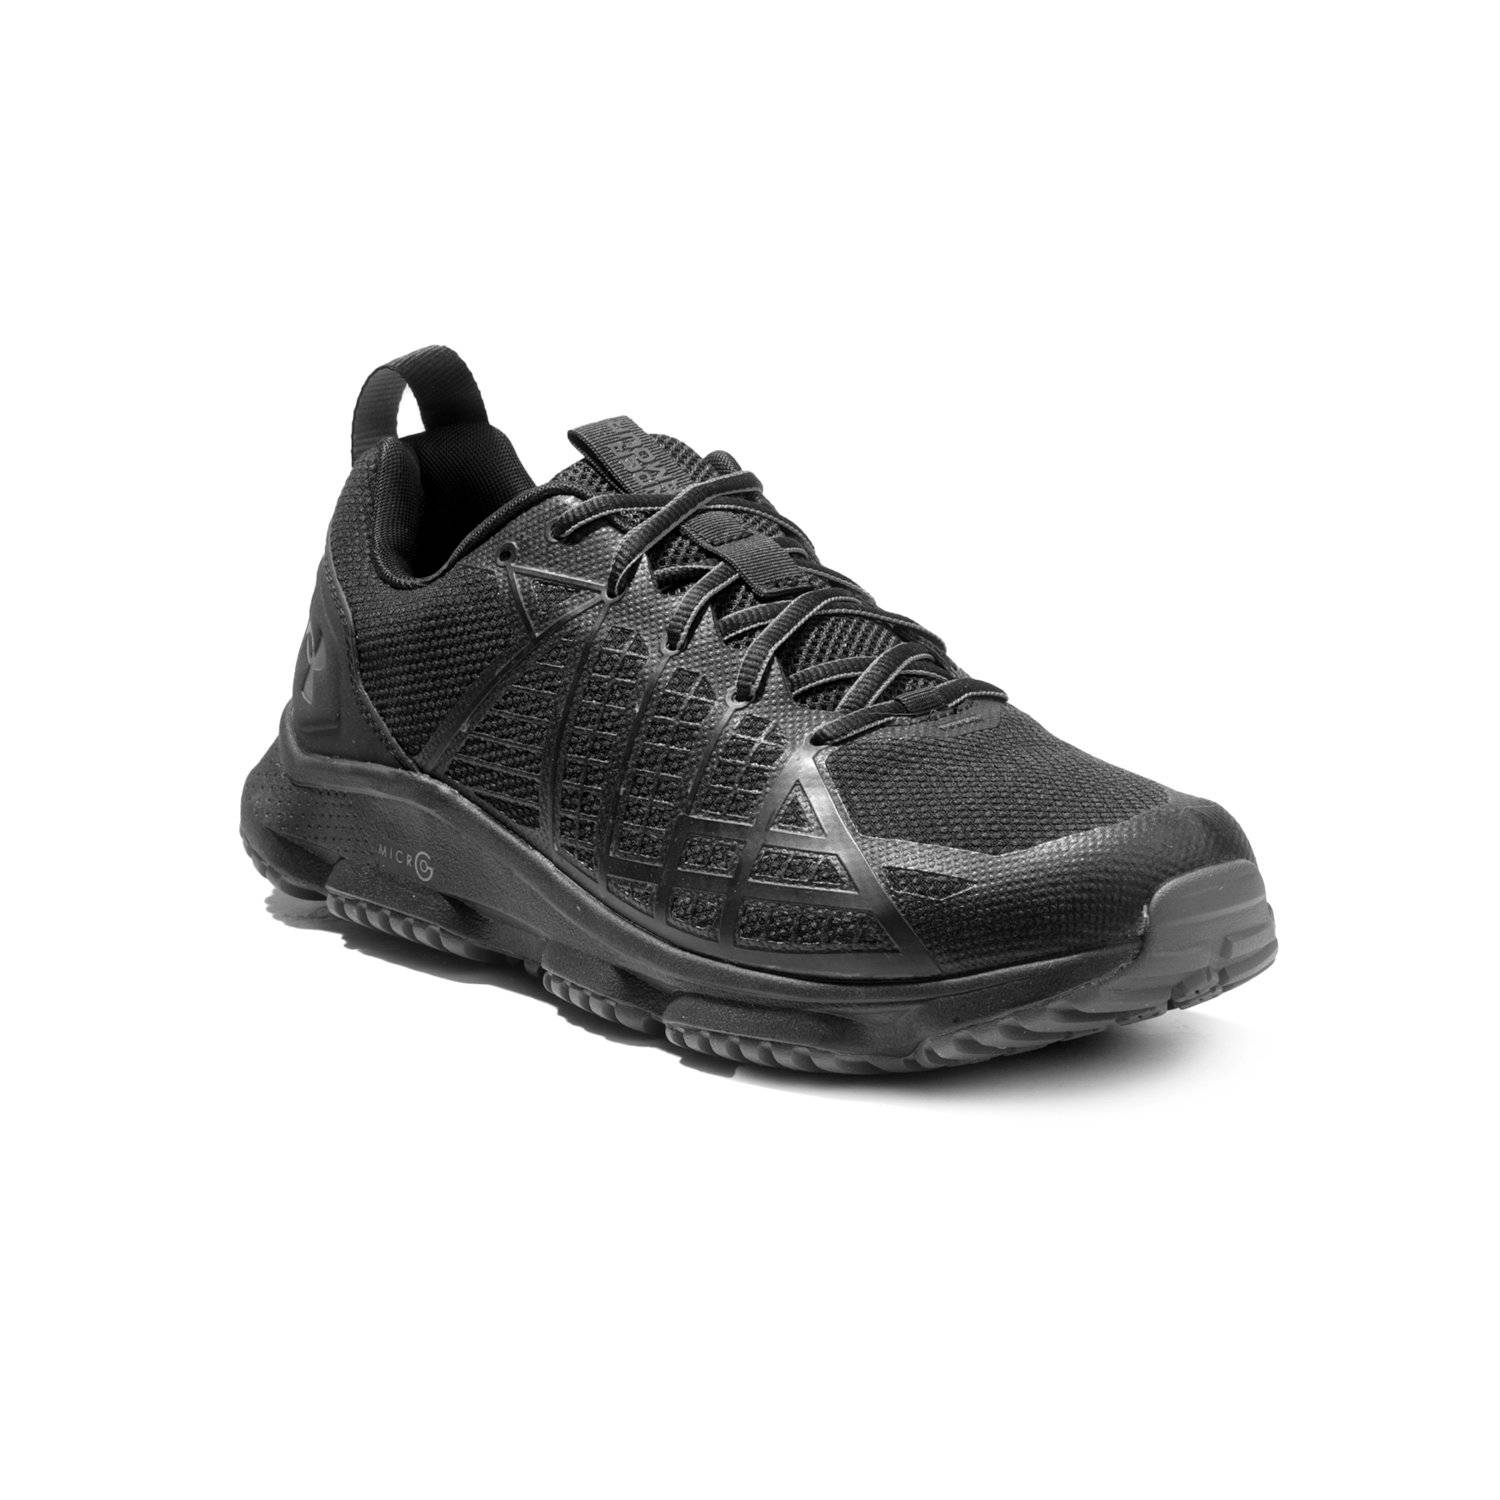 UNDER ARMOUR MG STRIKEFAST ATHLETIC SHOES